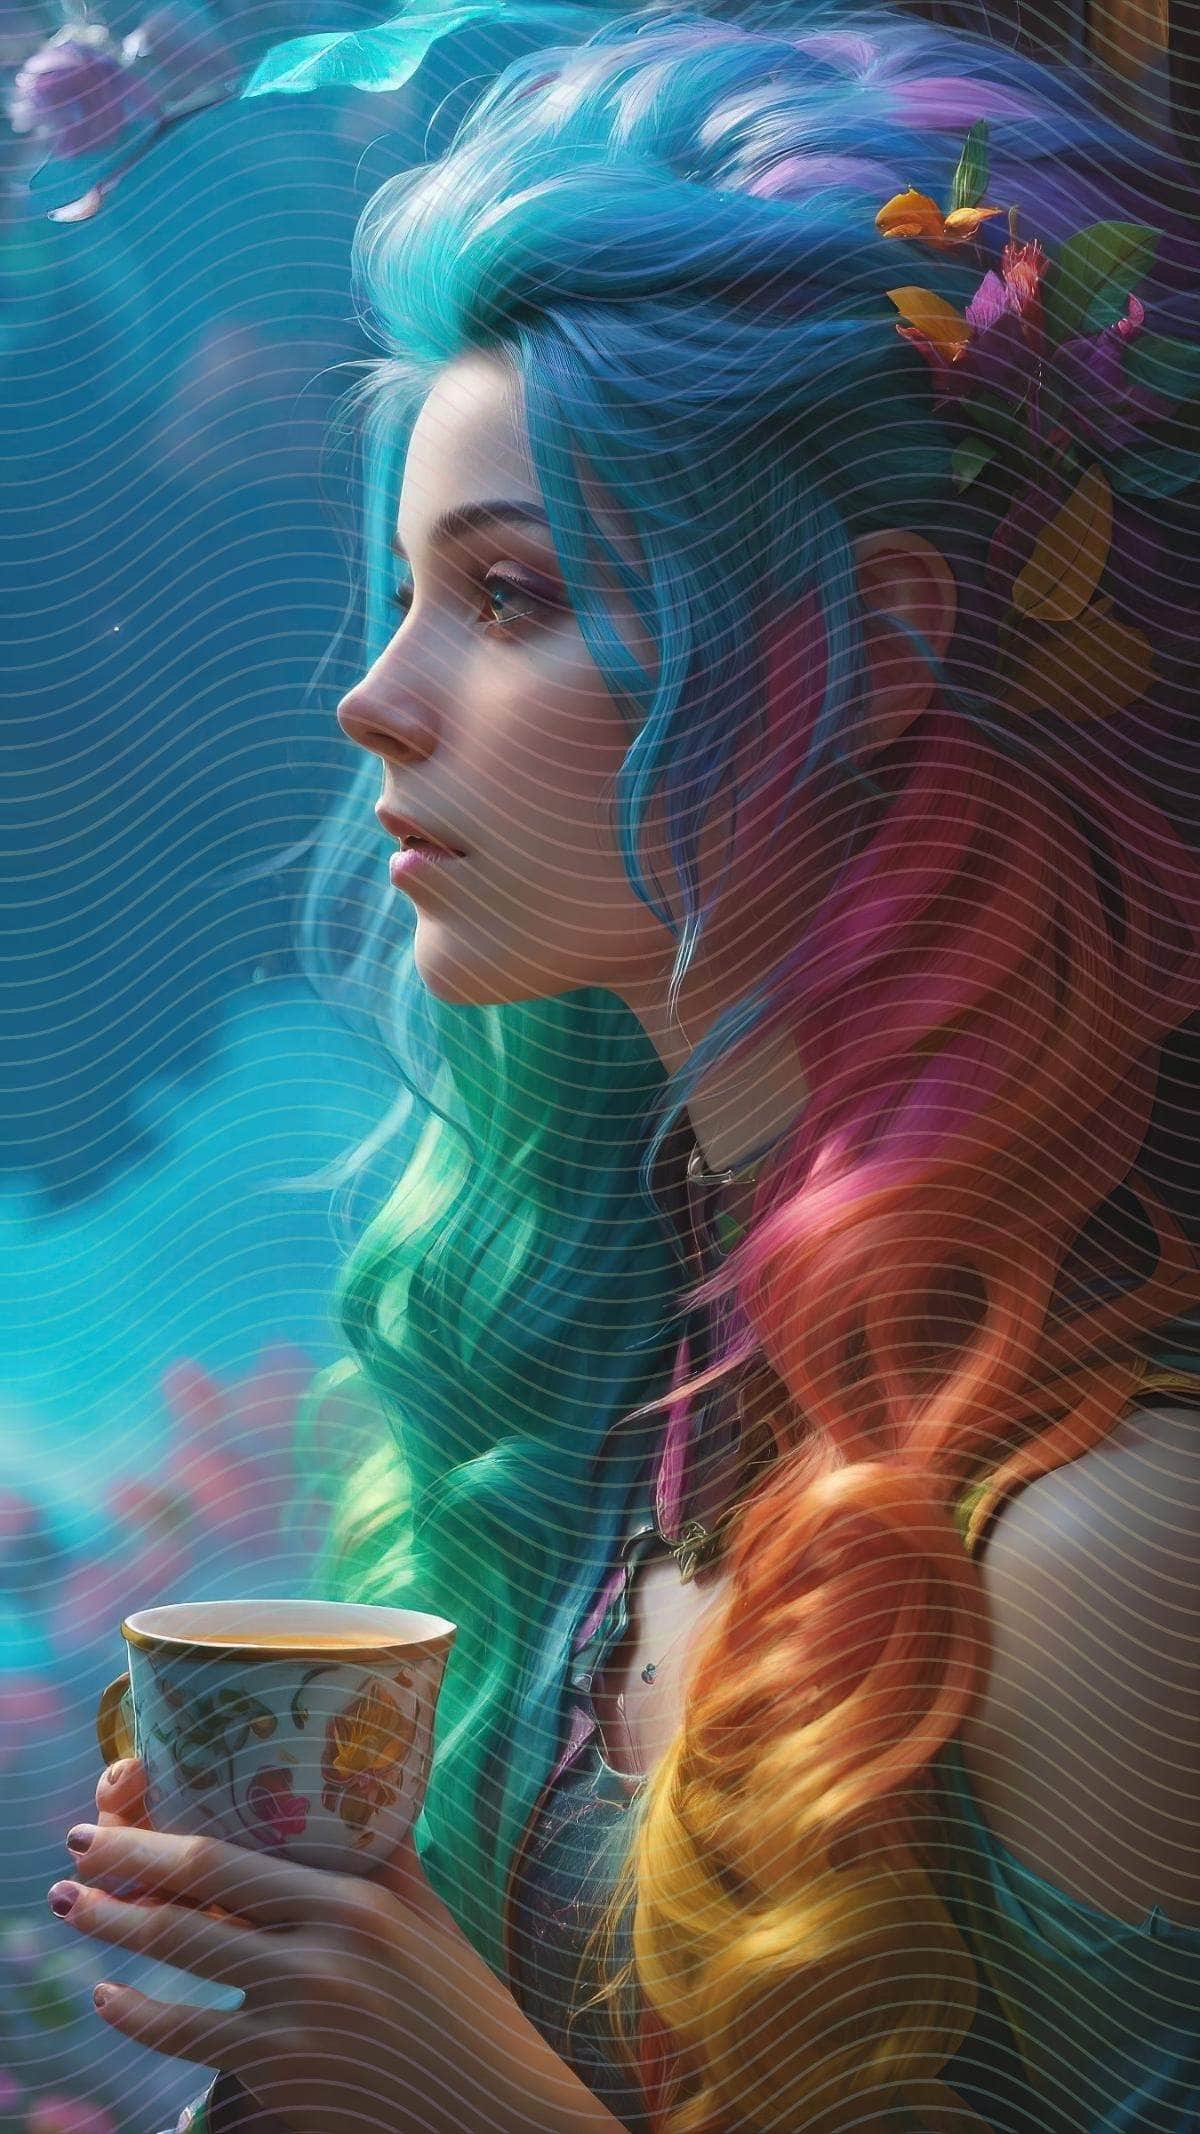 A Woman with Colorful Hair Holding a Cup